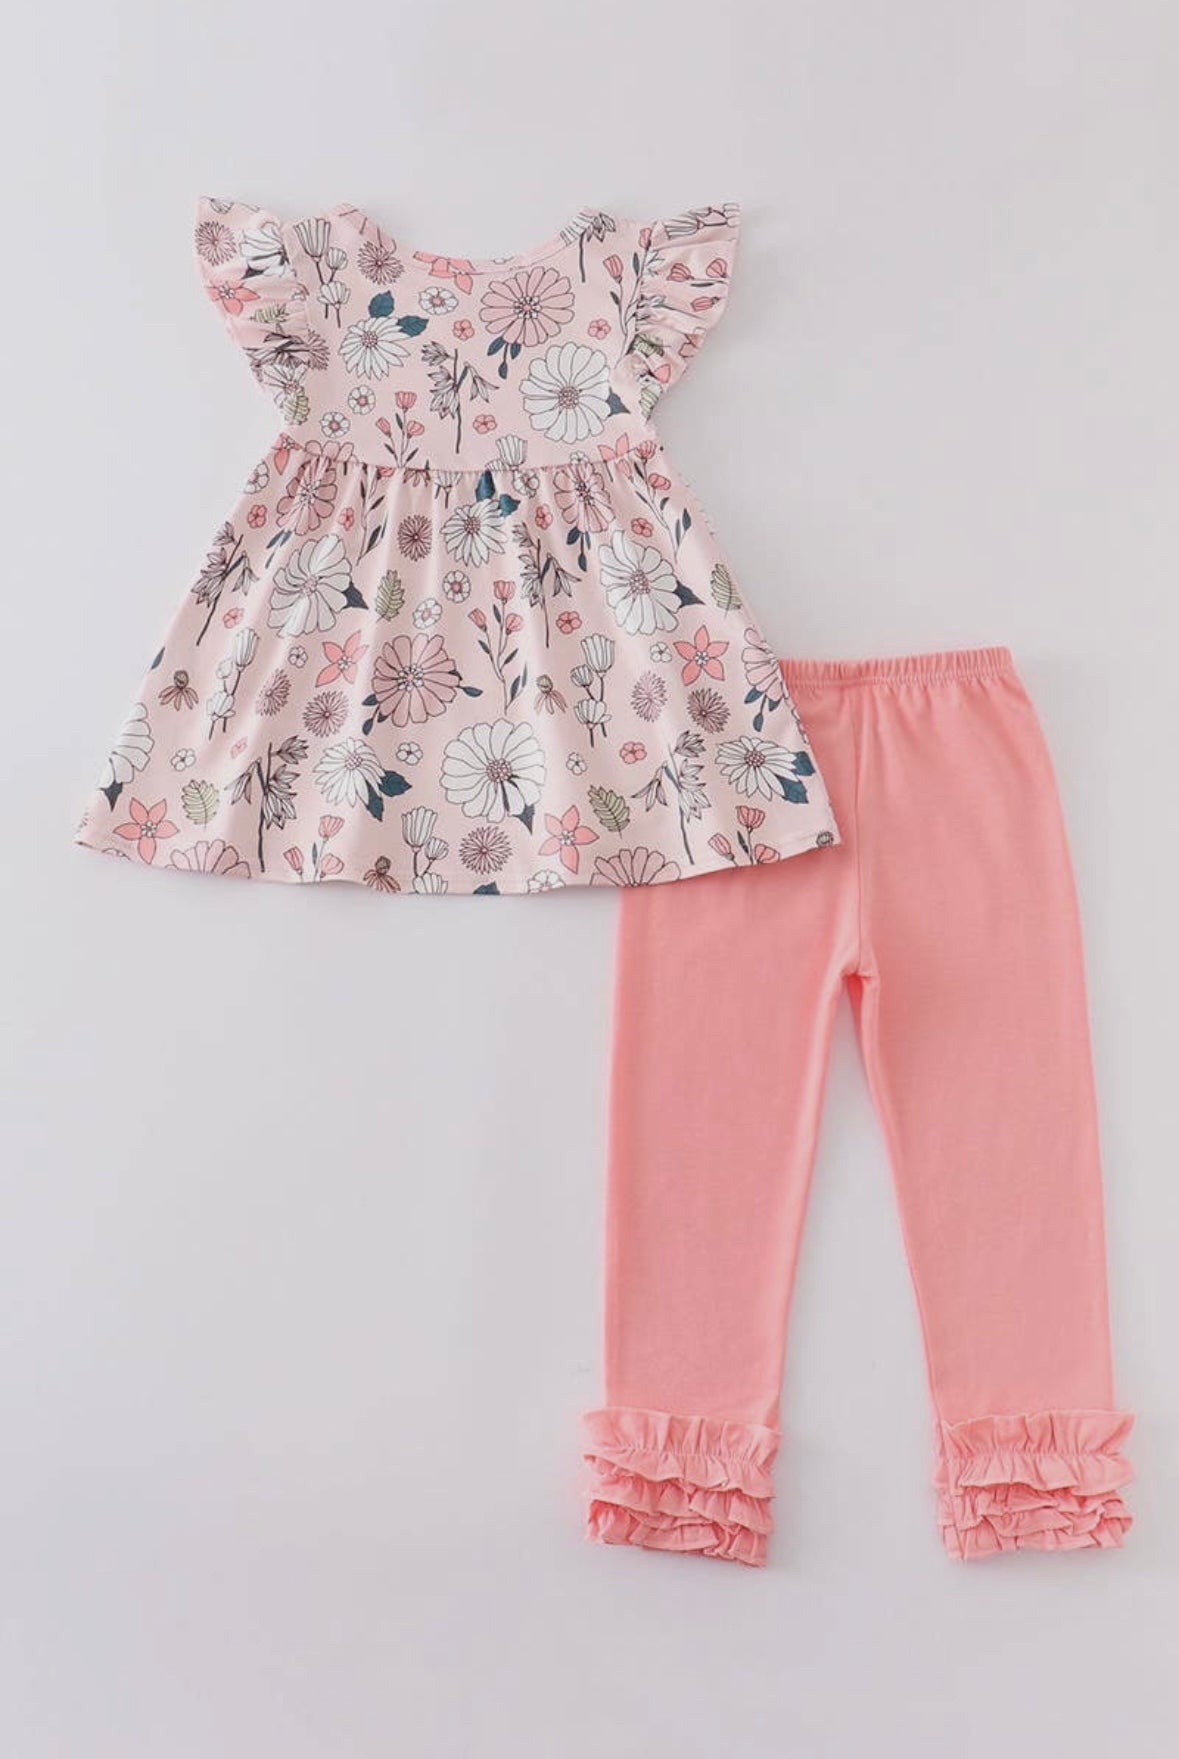 Retro Pink Flower Outfit